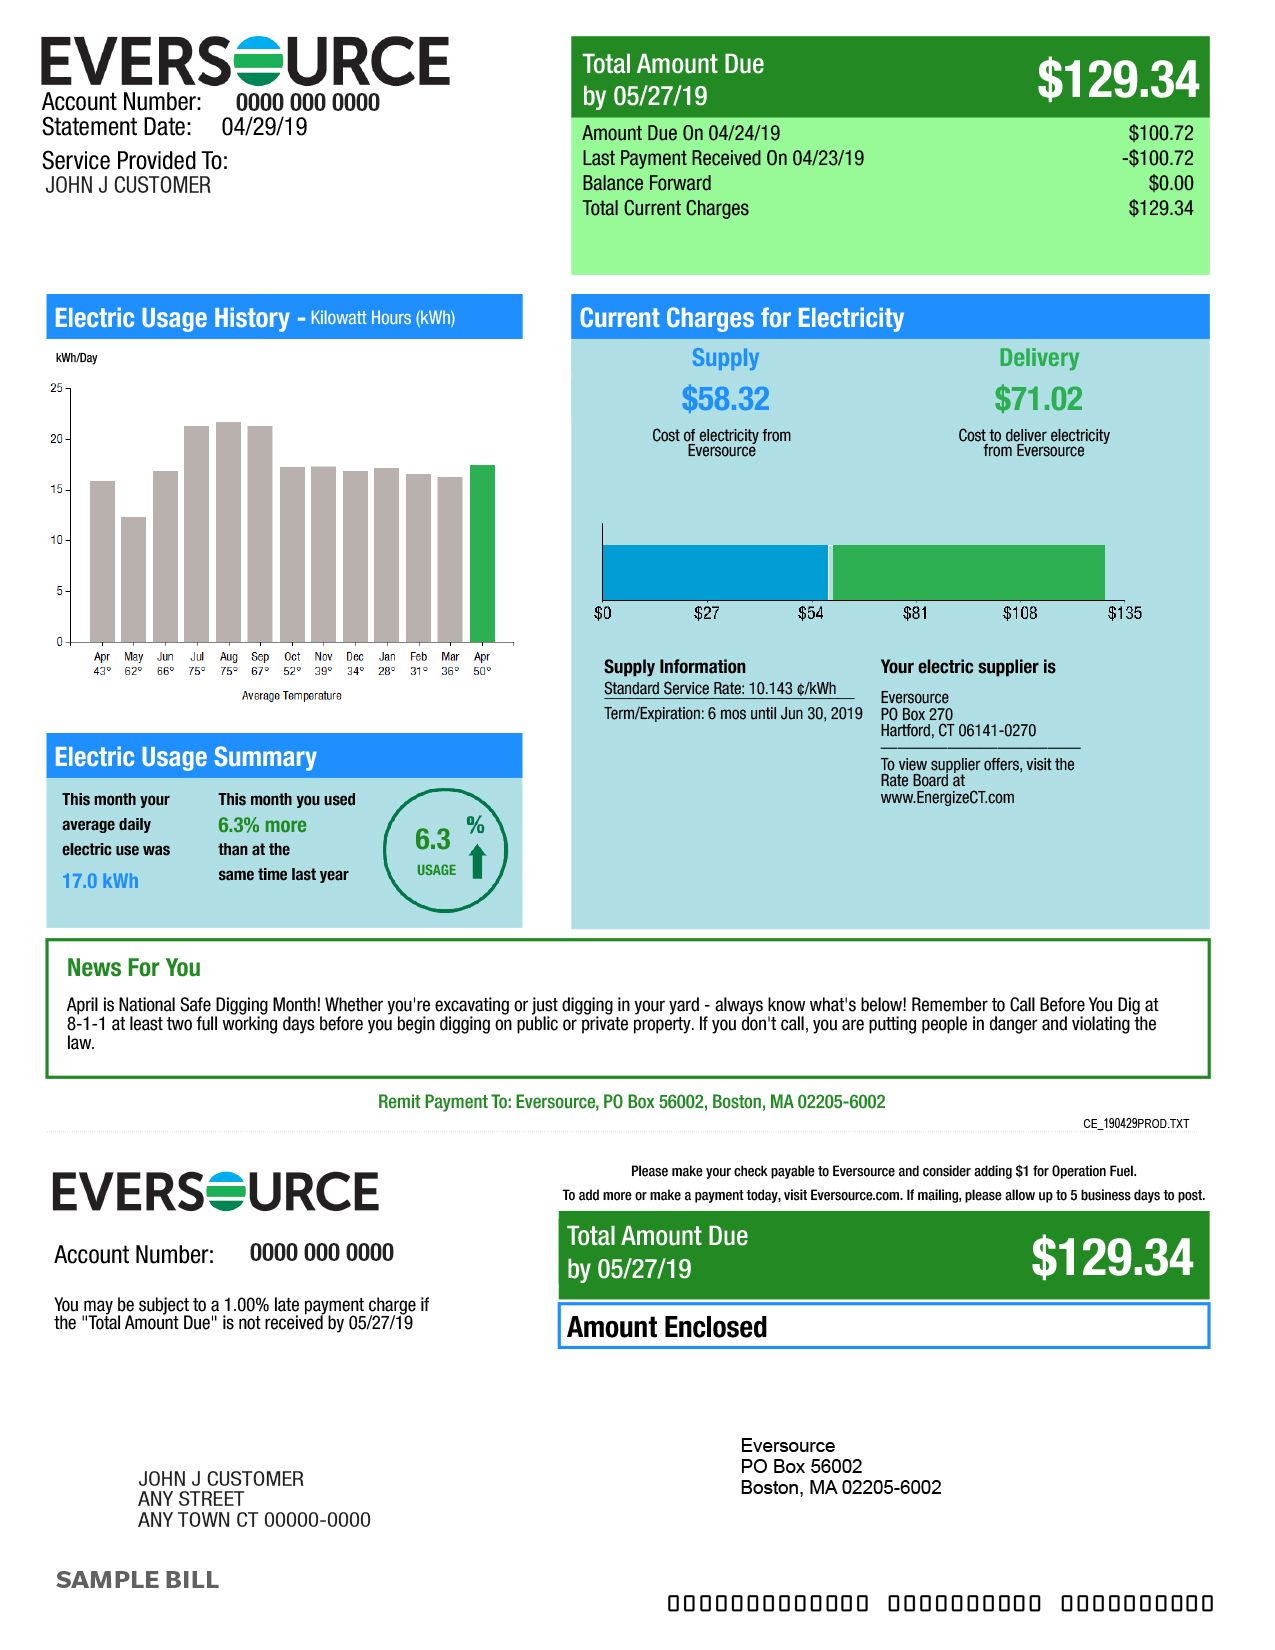 Sample first page of an Eversource electric bill